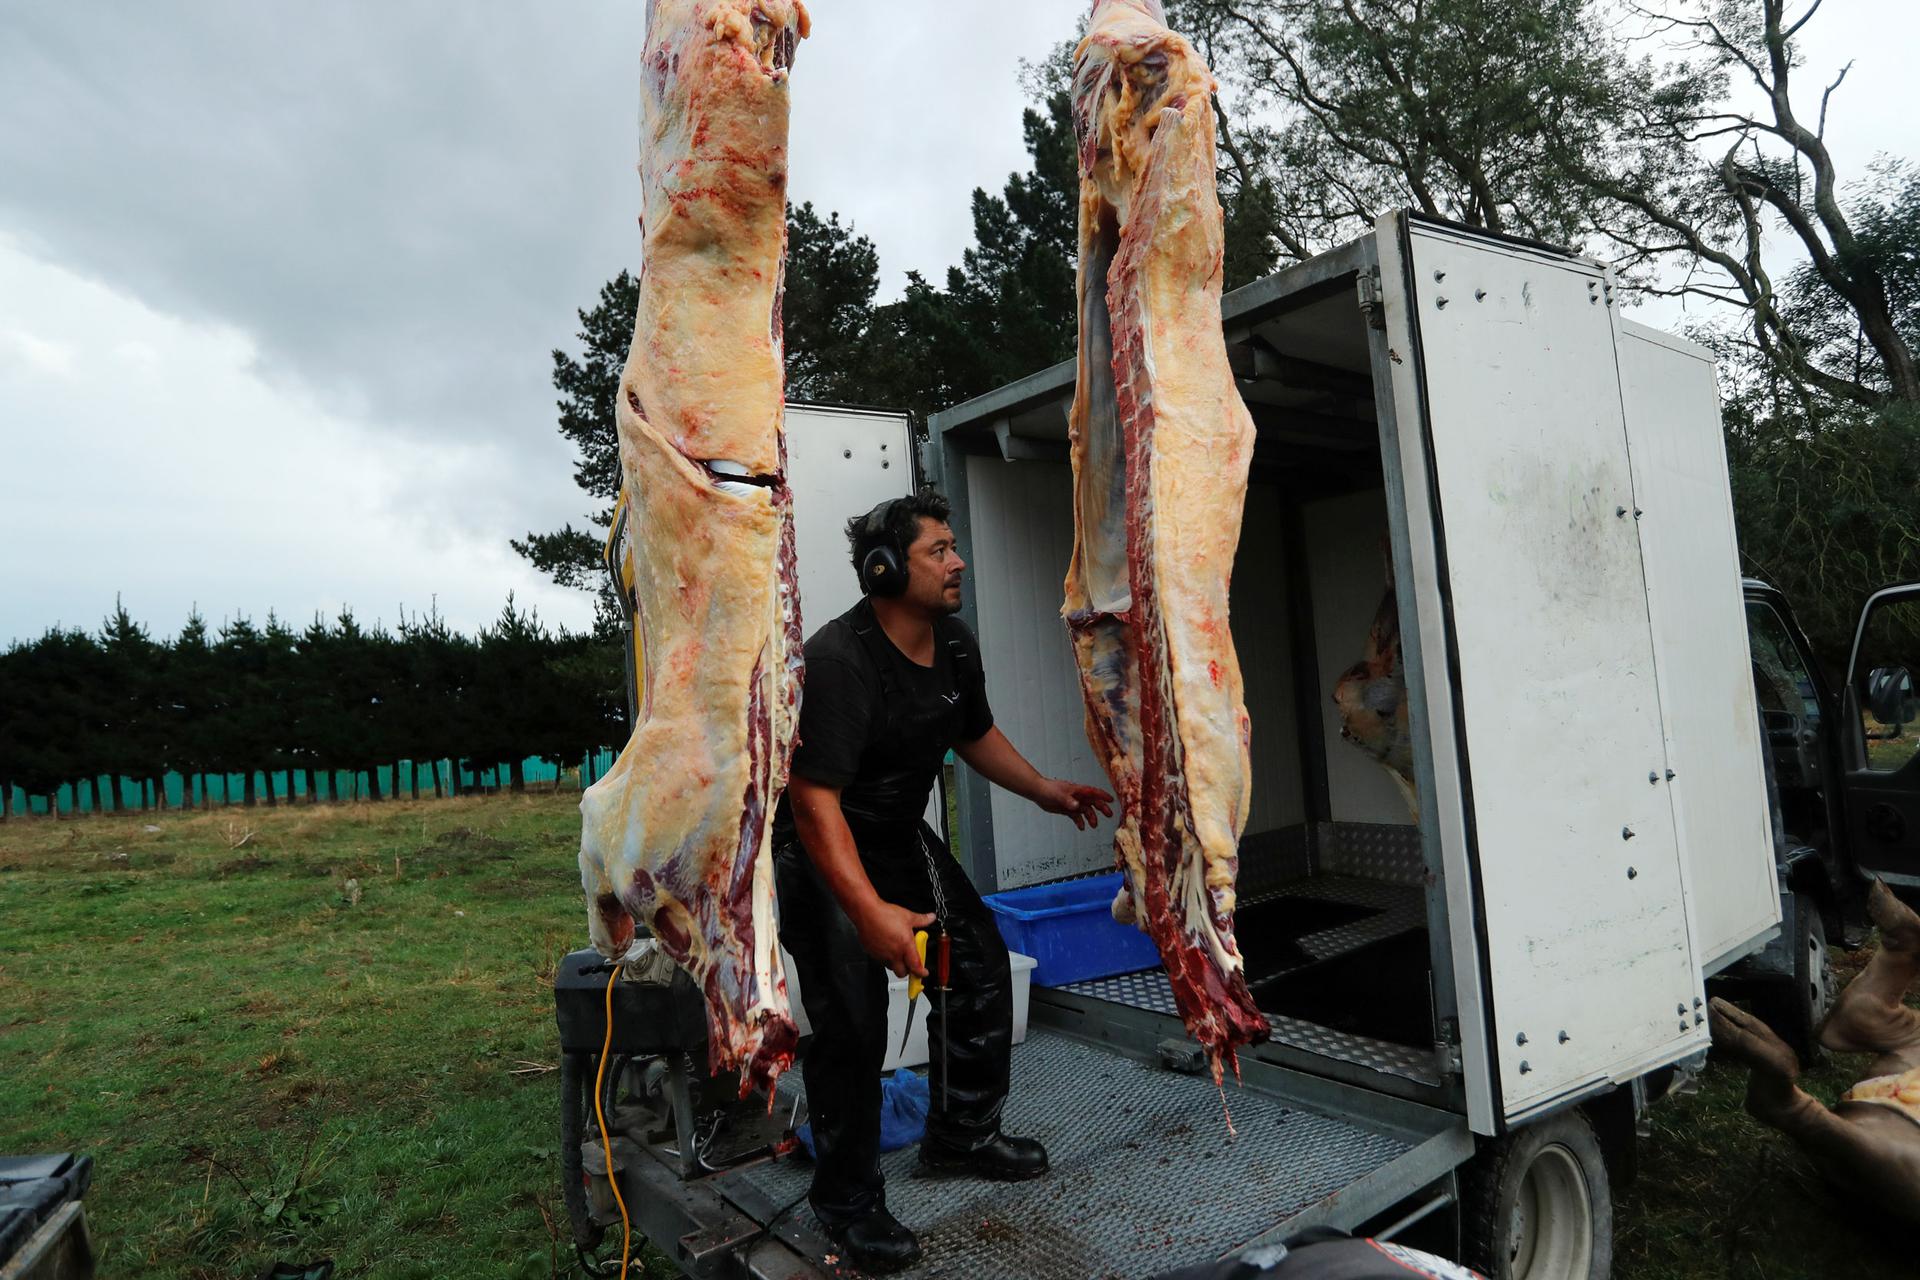 Noel Womersley is show next to two cow carcases with a knife in hand.